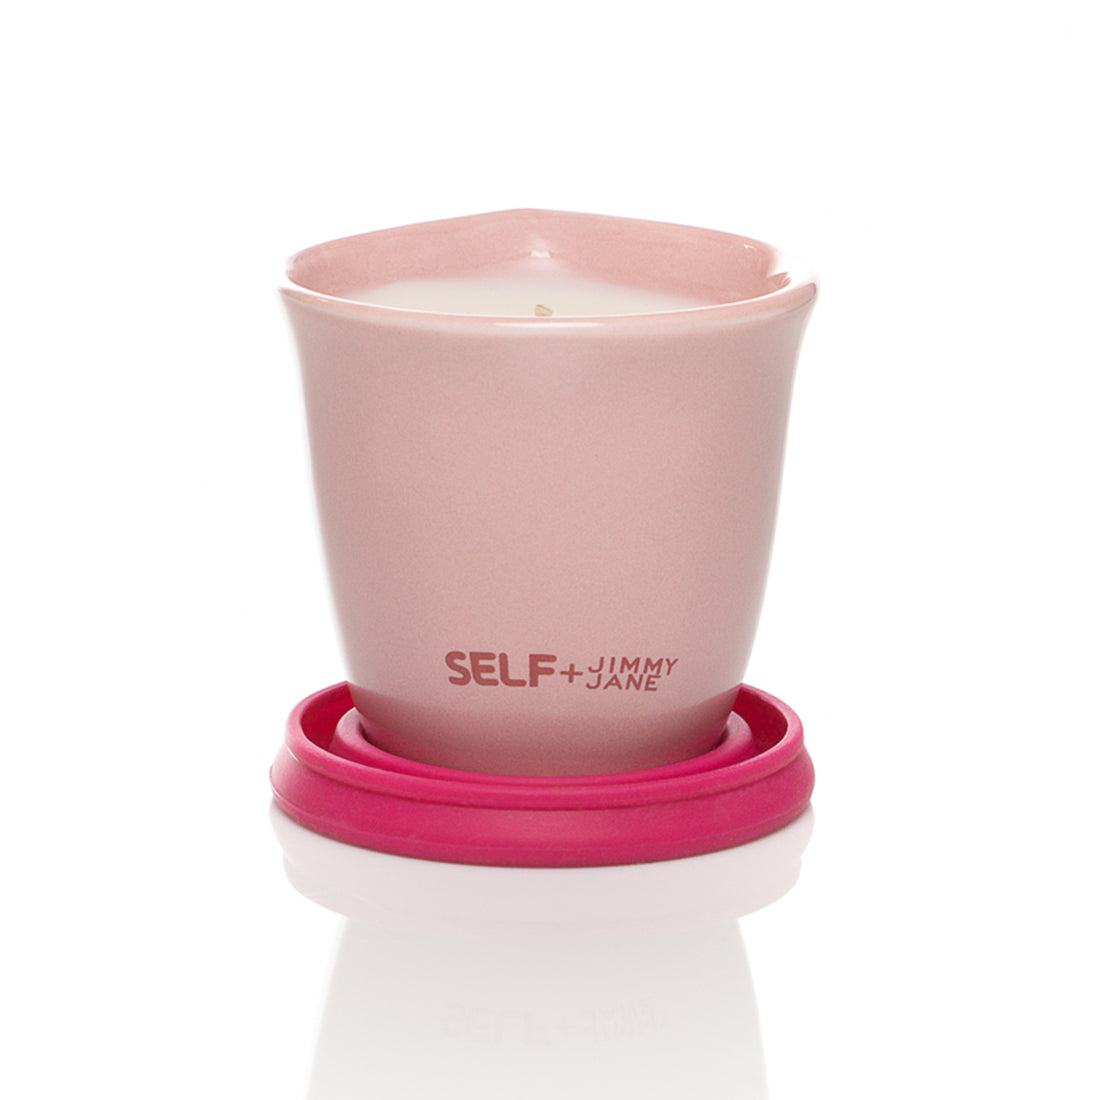 Self + Jimmyjane Tahitian Moss scented massage oil candle with burgundy base Front facing view